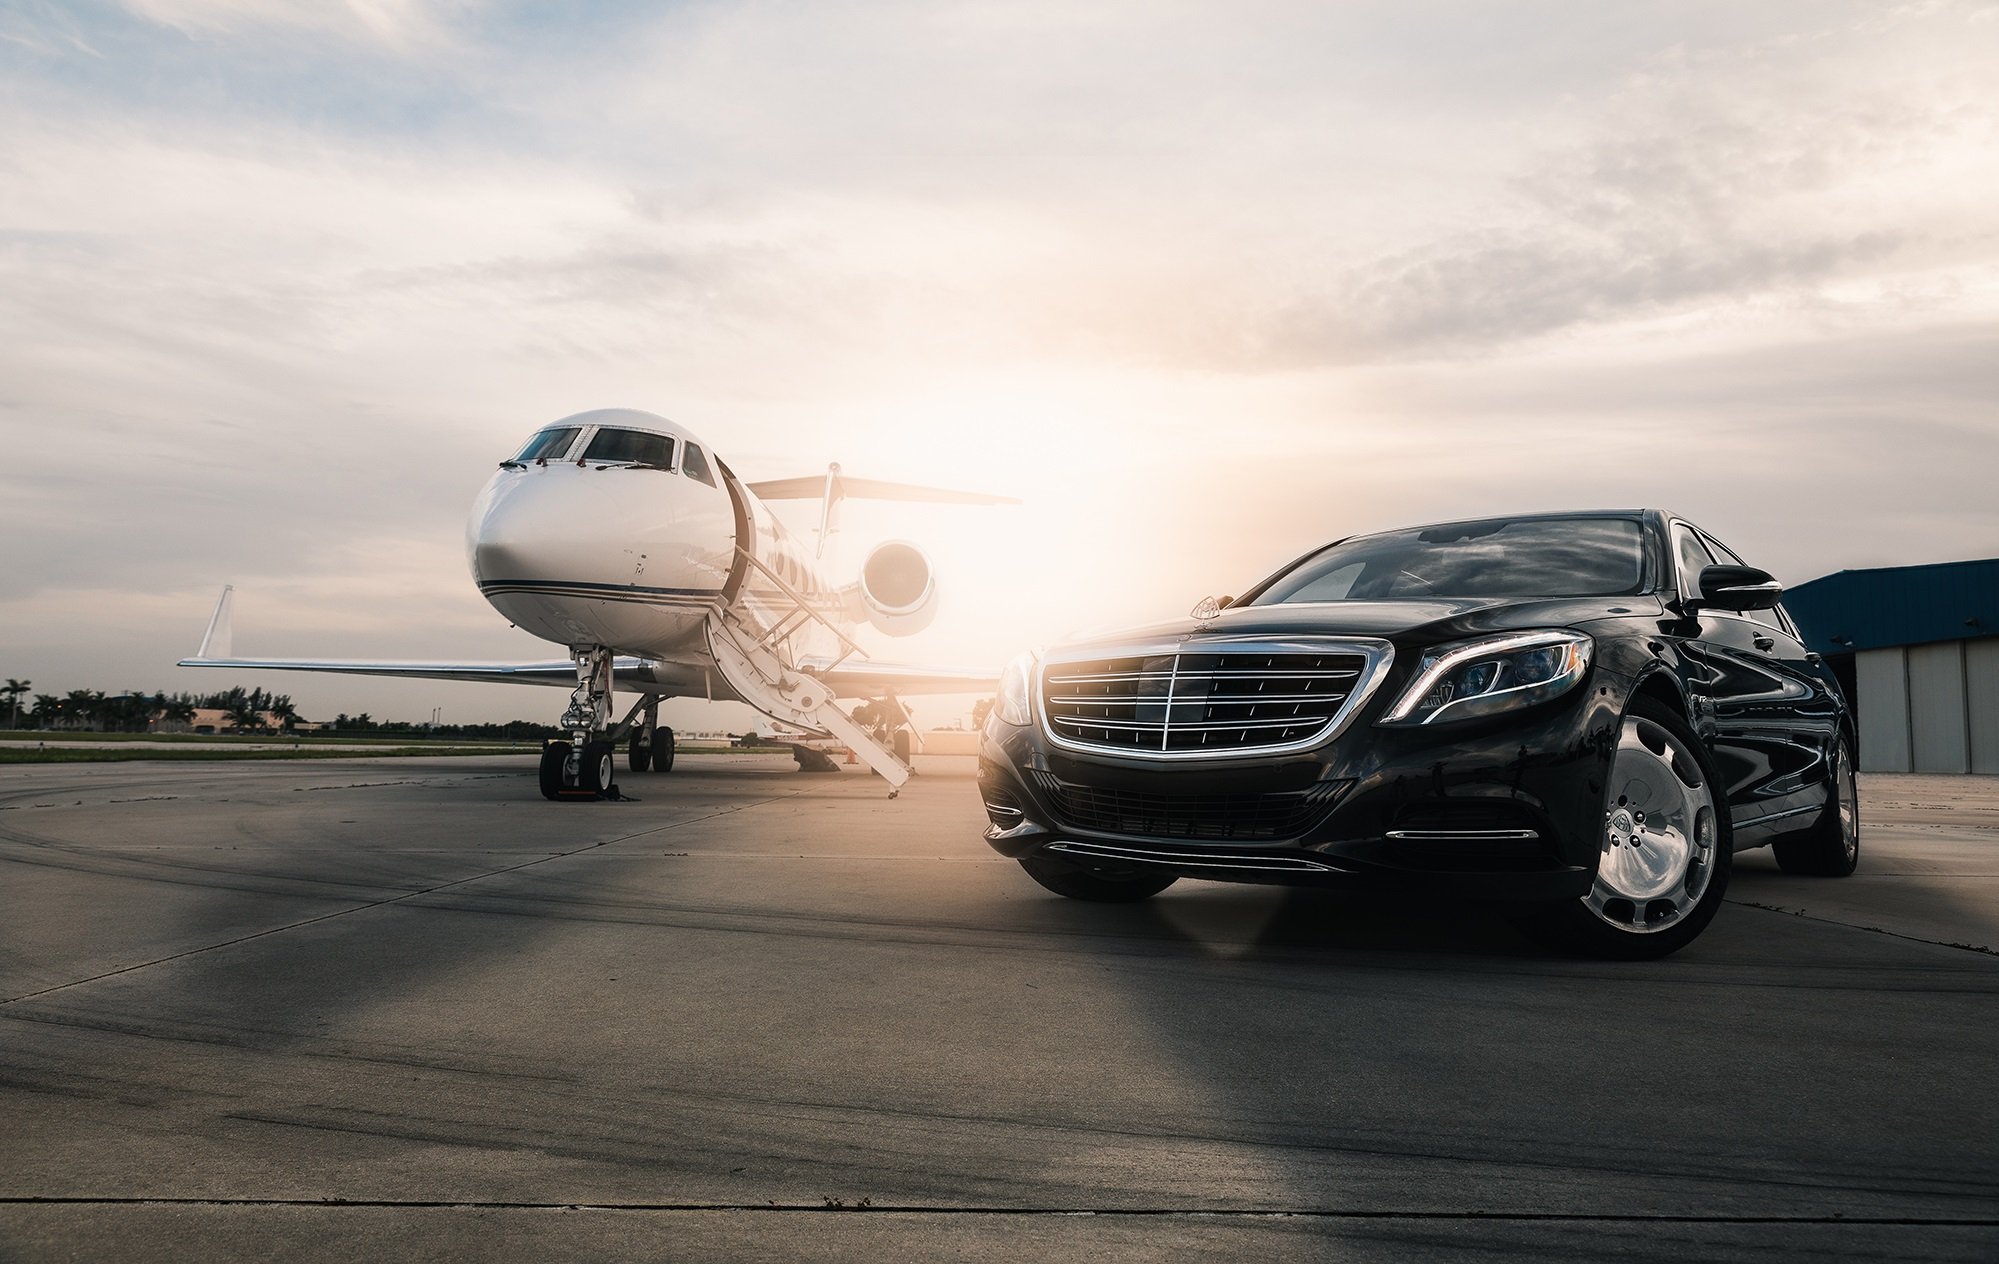 Private Jet and S-Class